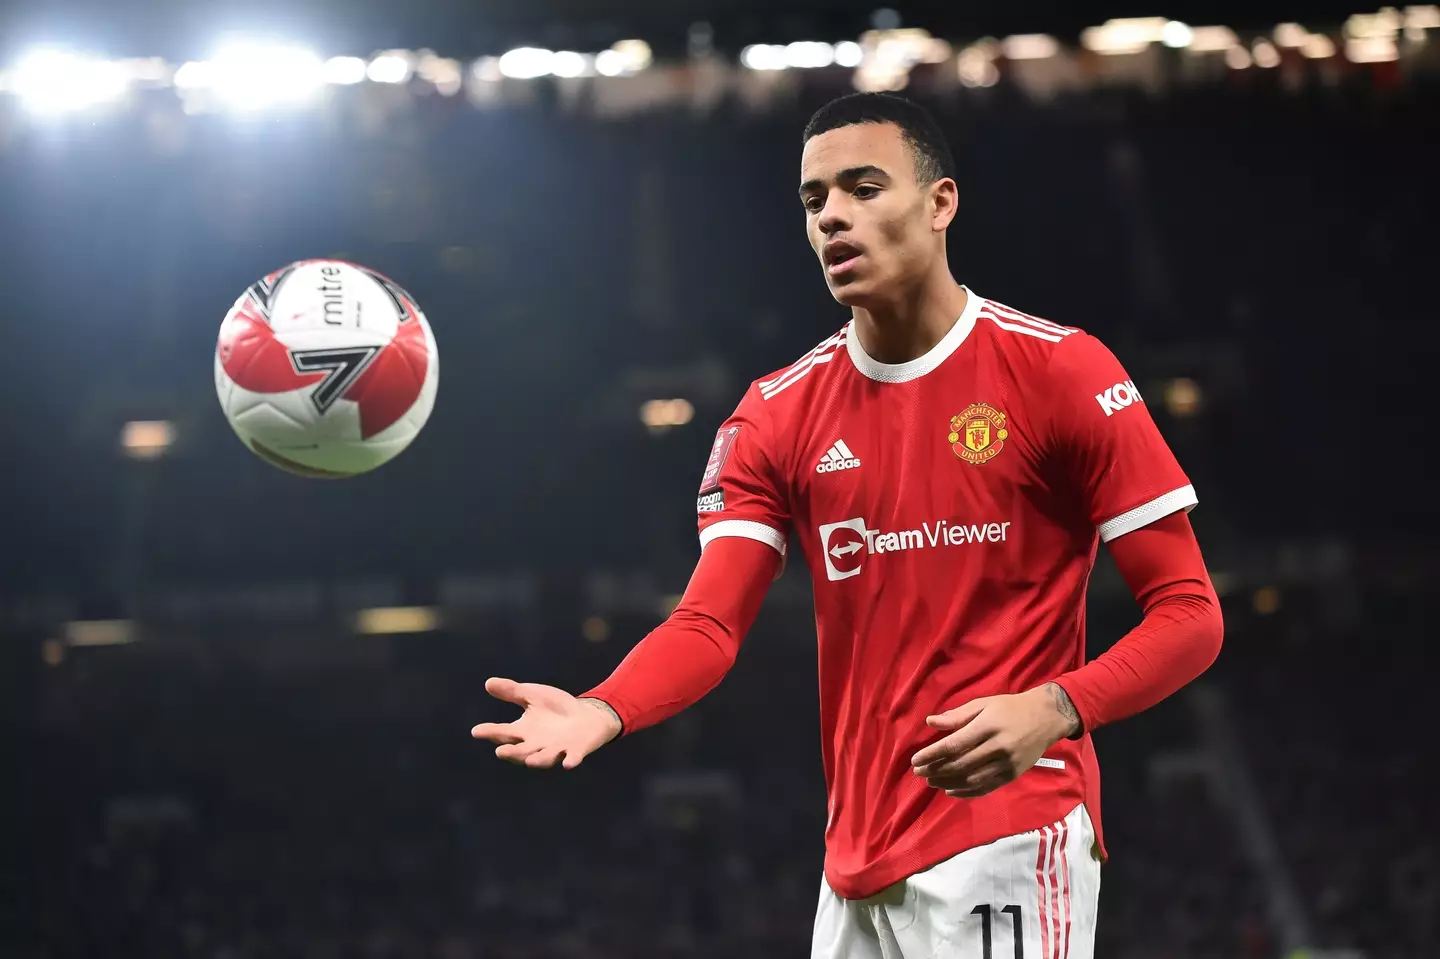 Greenwood has not played for United since January. Image: Shutterstock